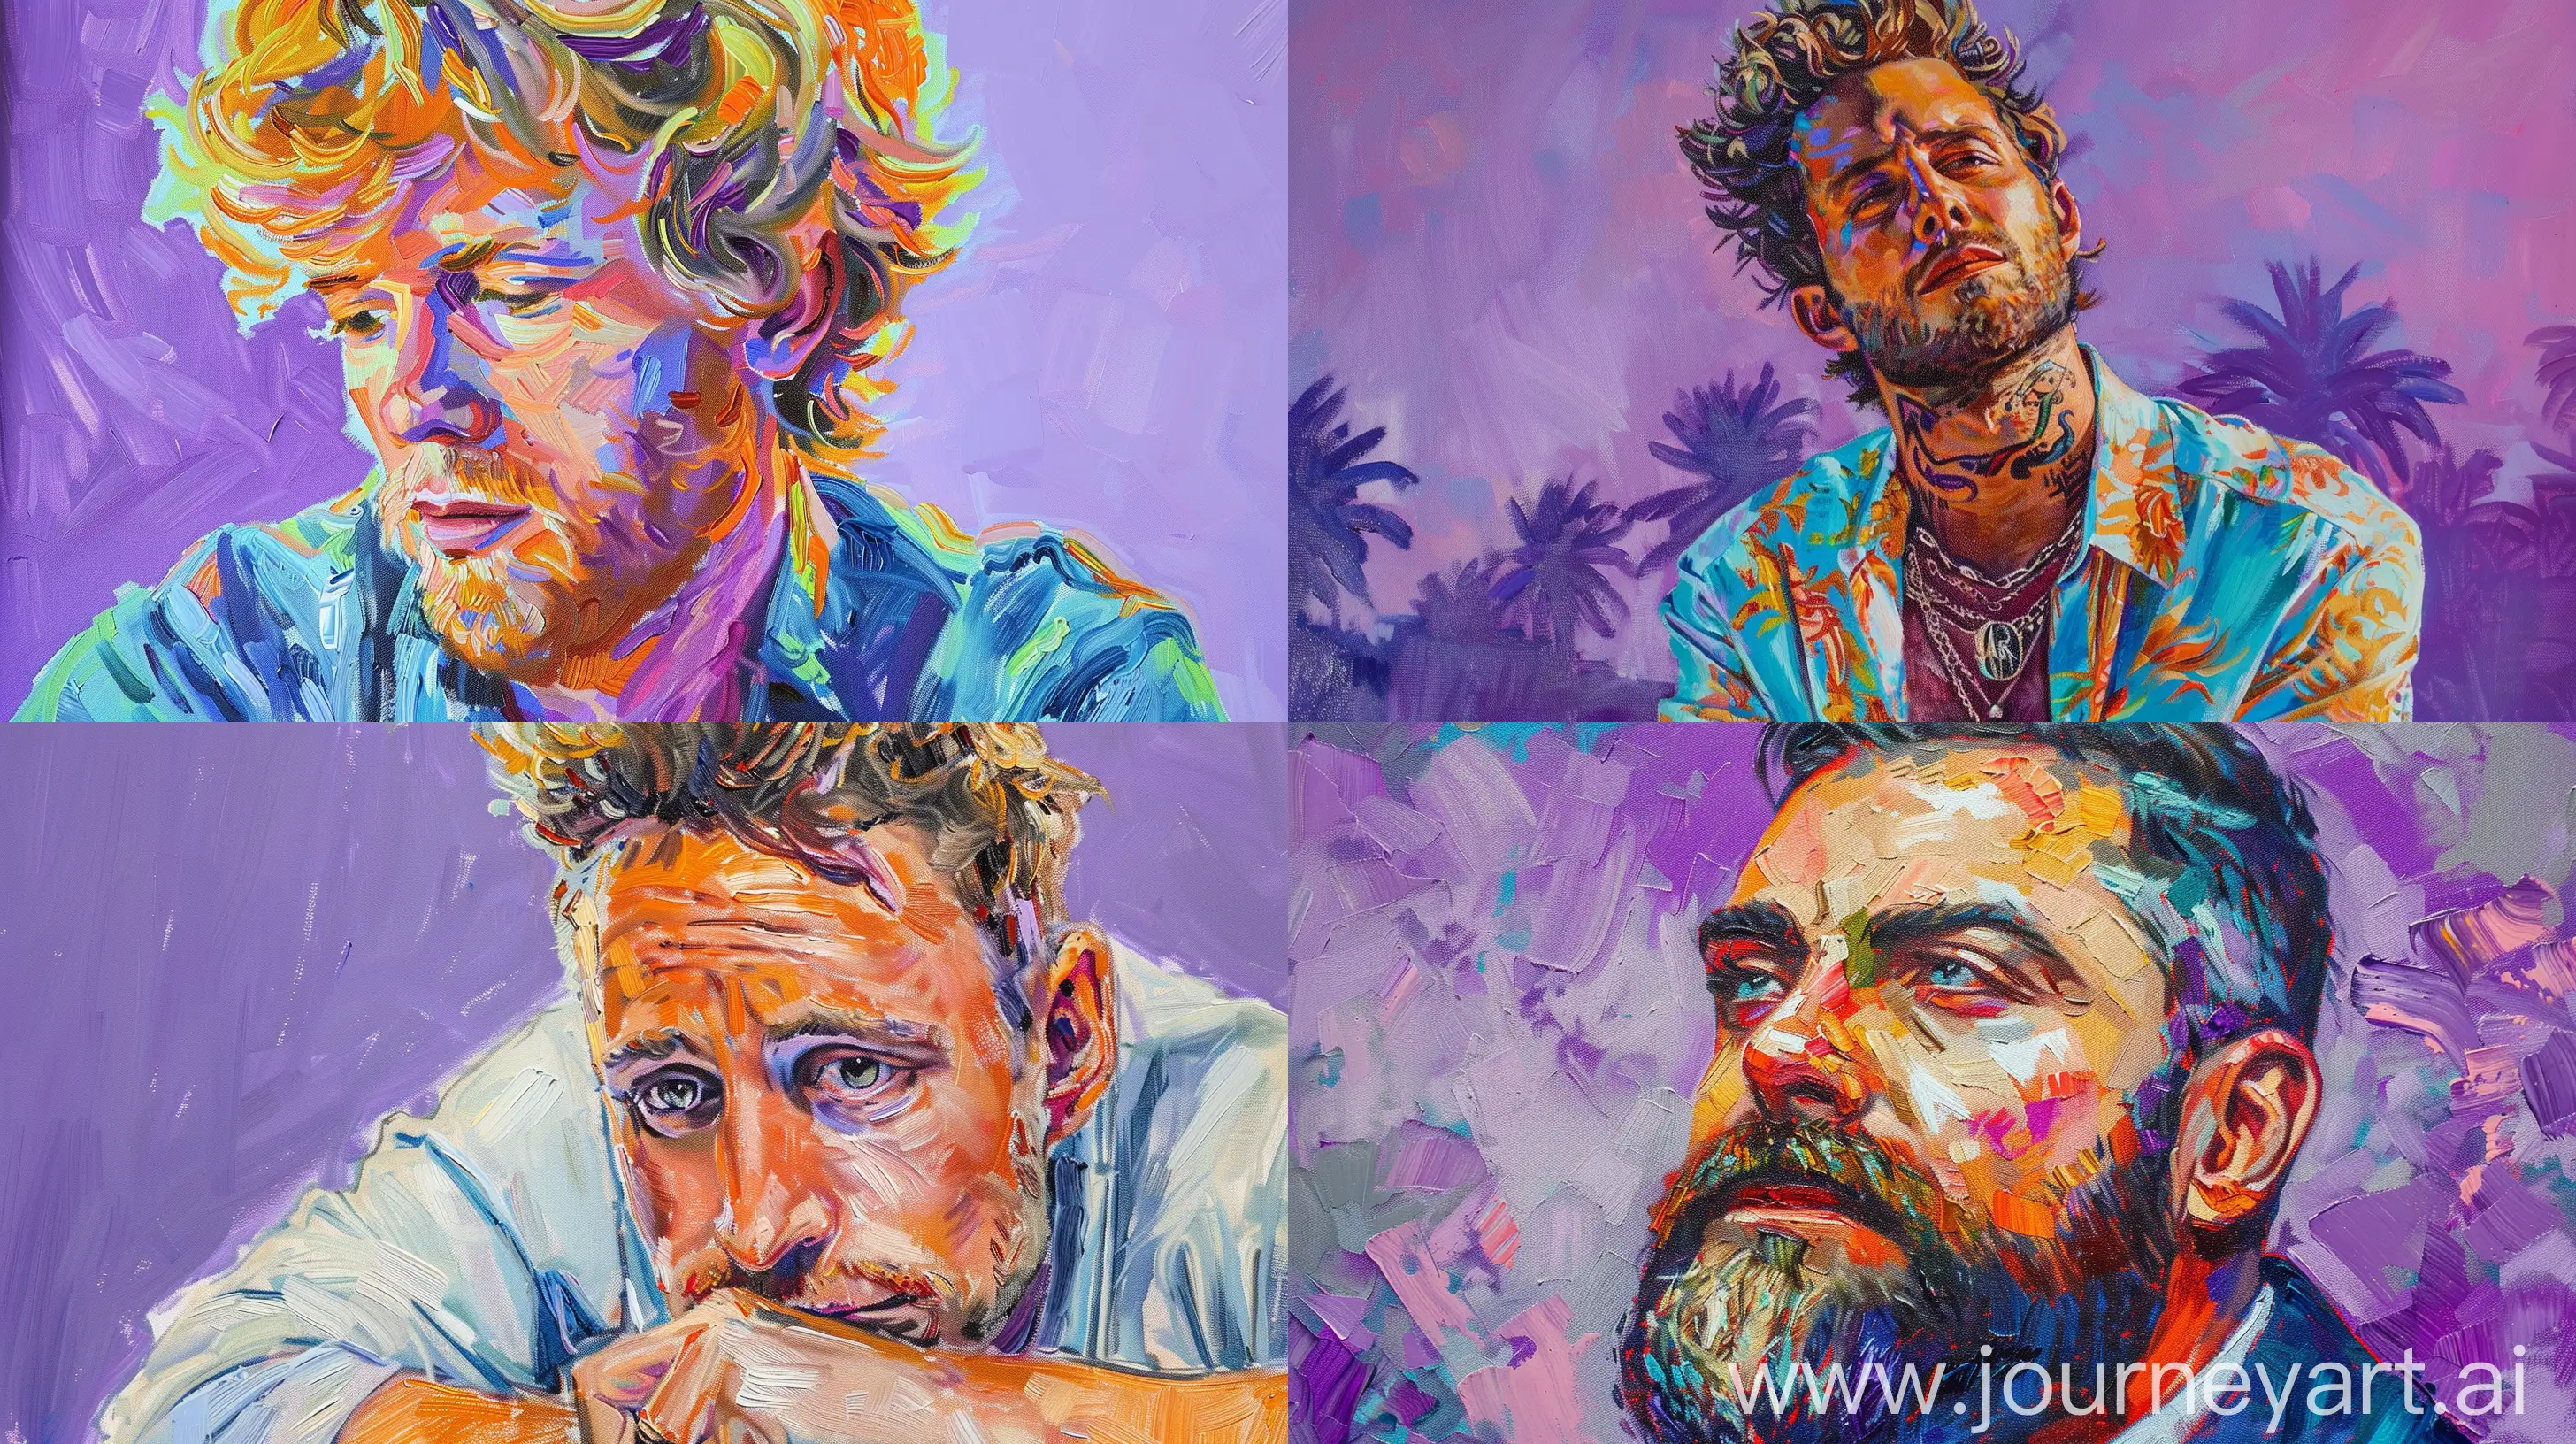 Matthew-Perry-Portrait-in-Van-Gogh-Style-Soft-Vibrant-Pastels-on-Purple-Background